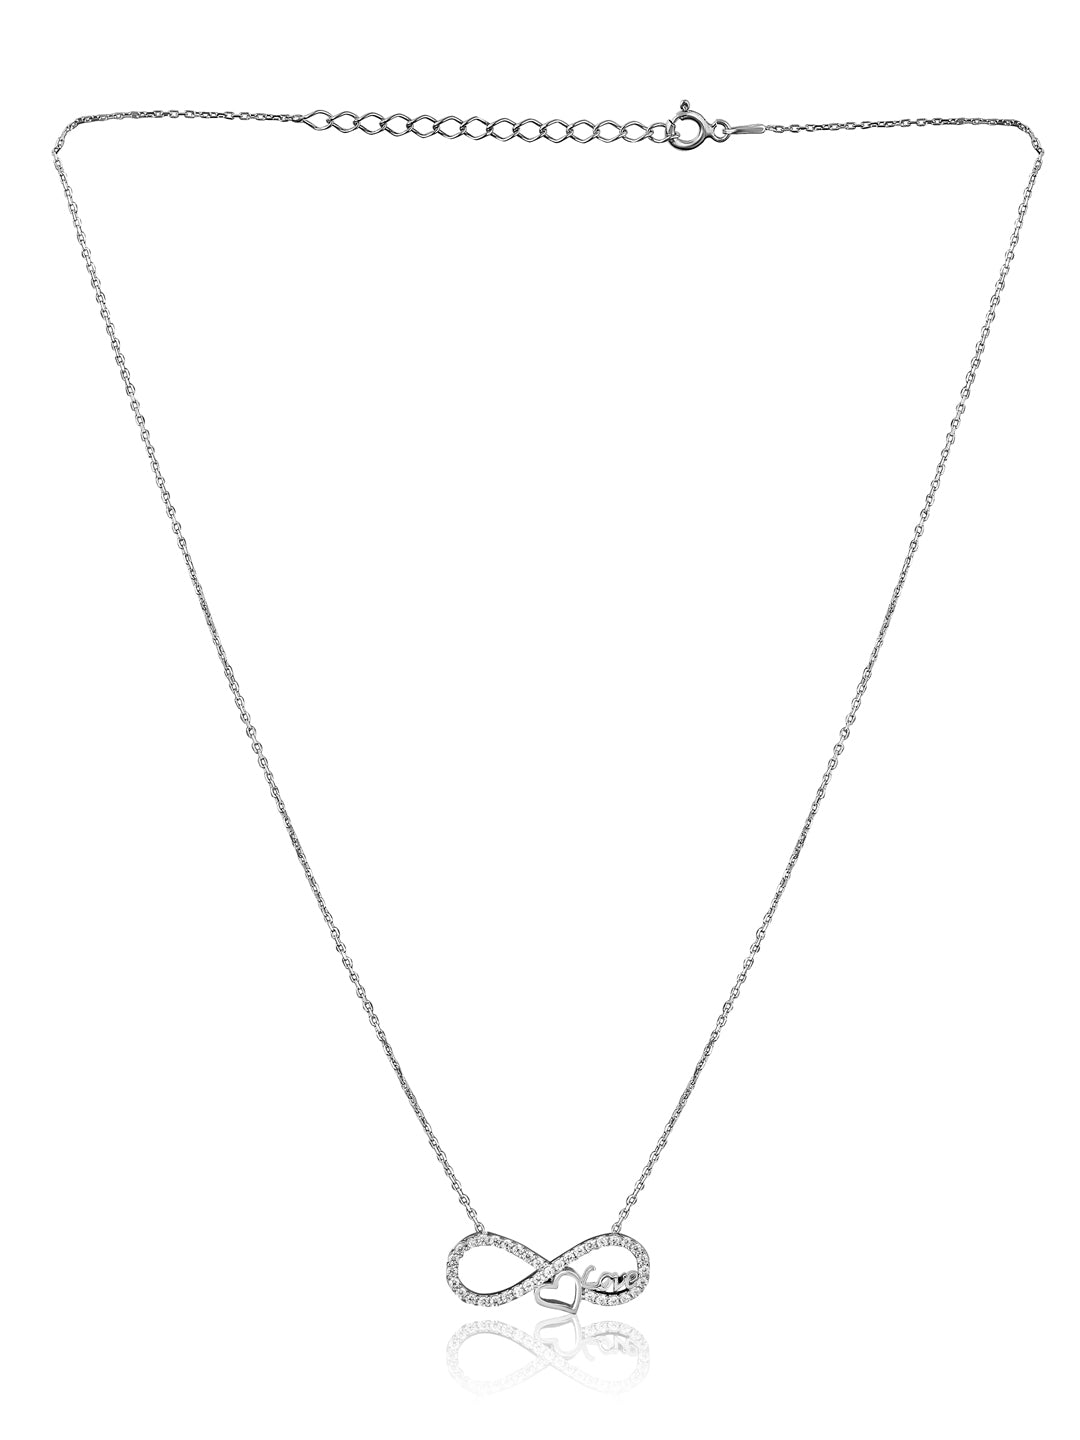 Pure Silver Infinity Heart Necklace Embellished With Cubic Zirconia Stones 